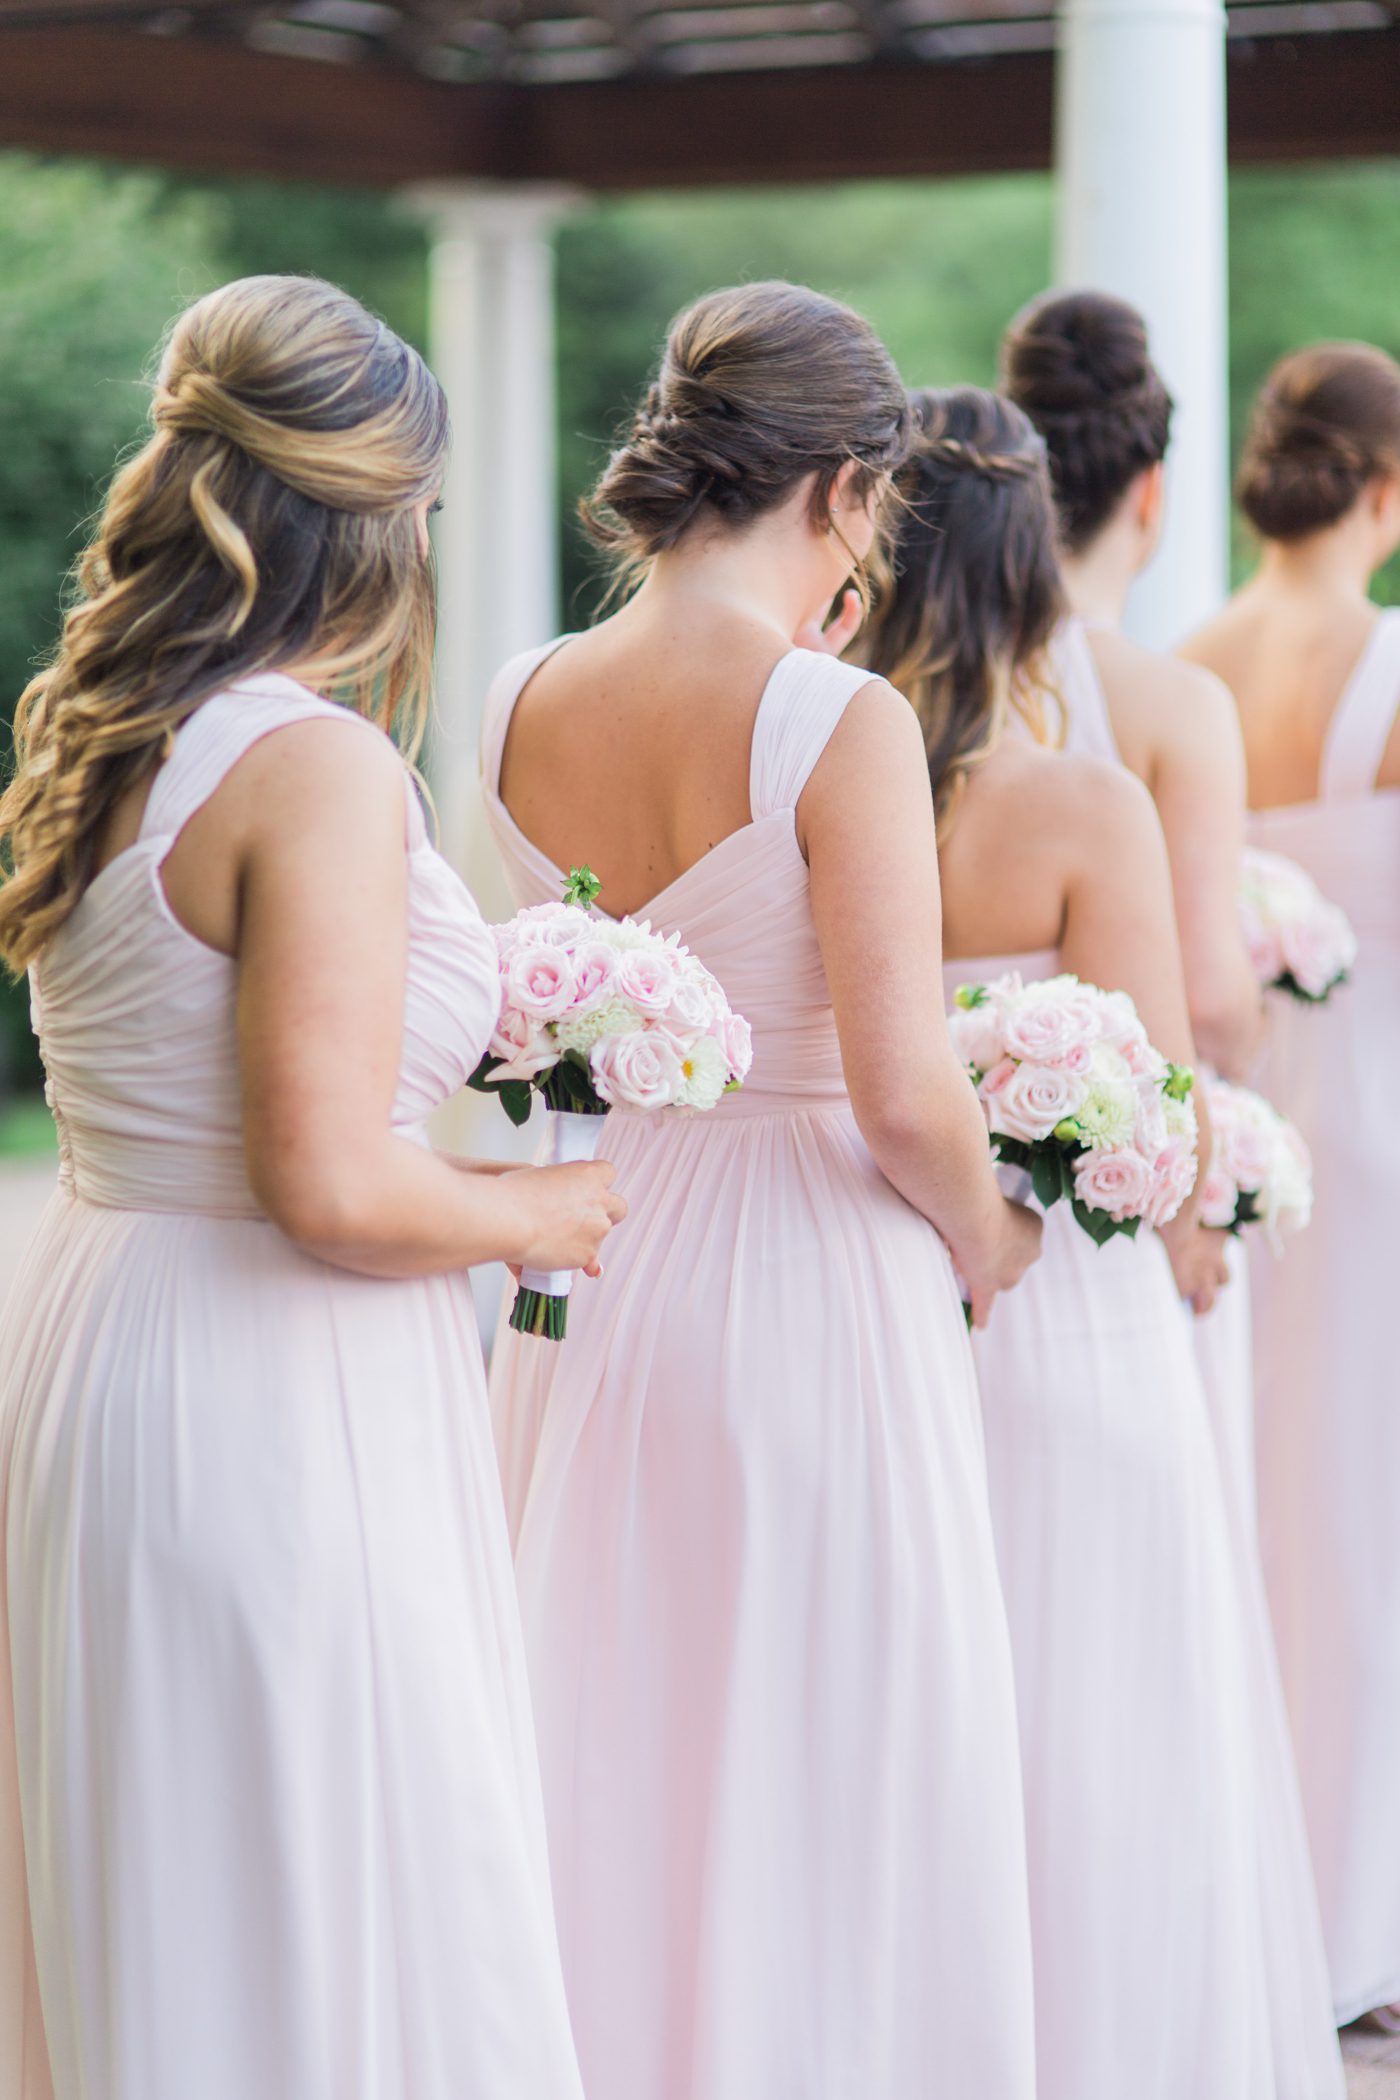 Bridesmaids standing at the ceremony